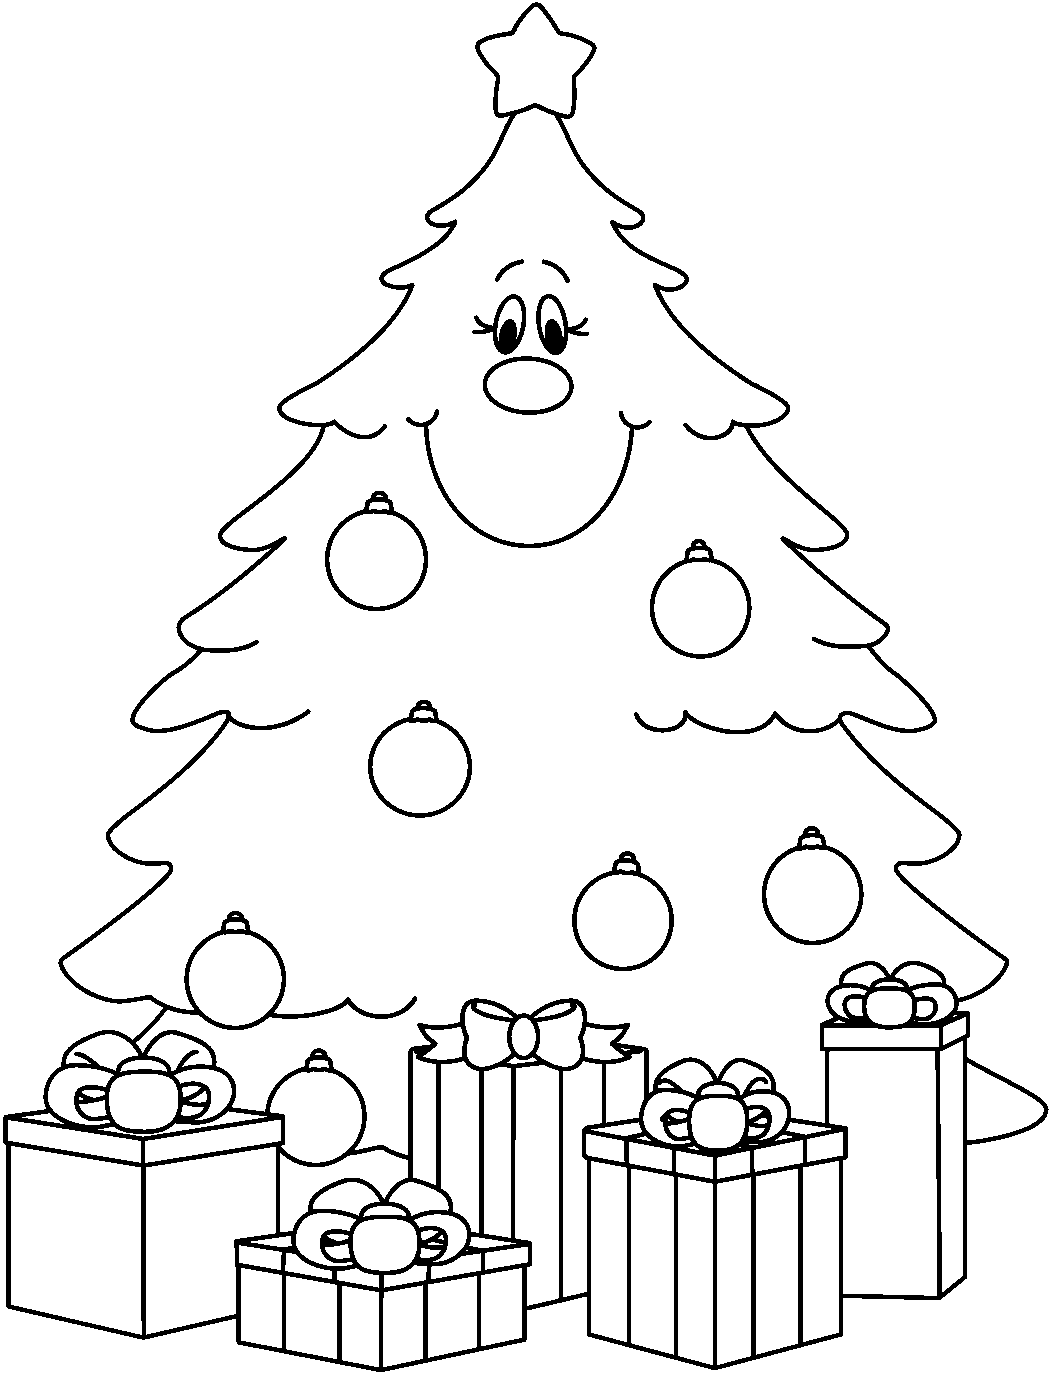 Christmas black and white chr - Black And White Christmas Clipart